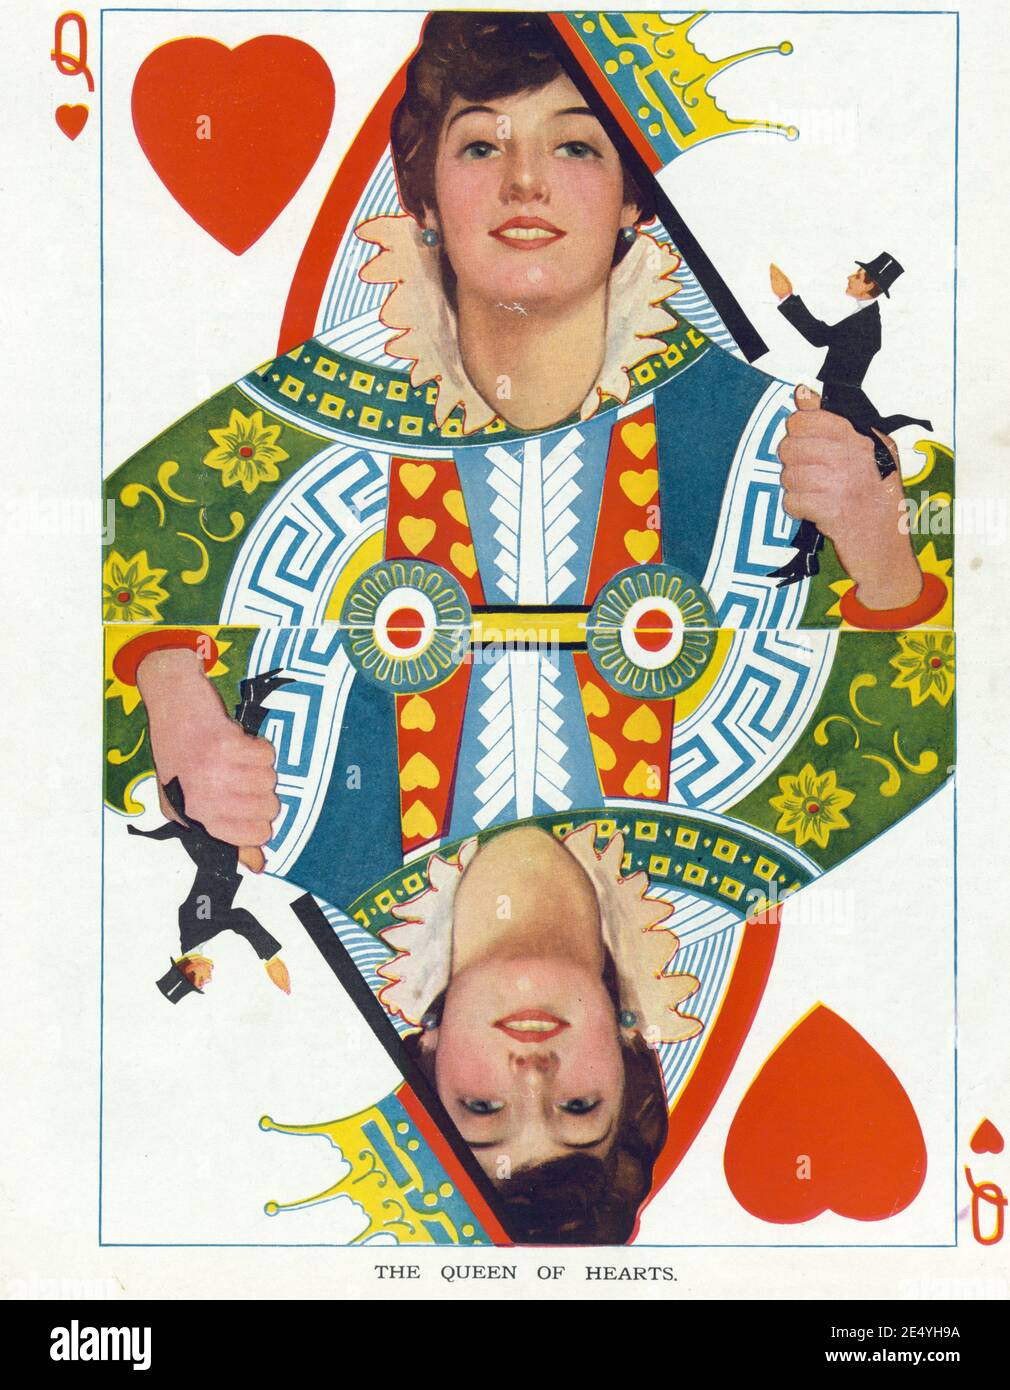 Evelyn Nesbit's face as 'The Queen of Hearts' on playing card. Puck weekly magazine, March 25, 1914 Stock Photo